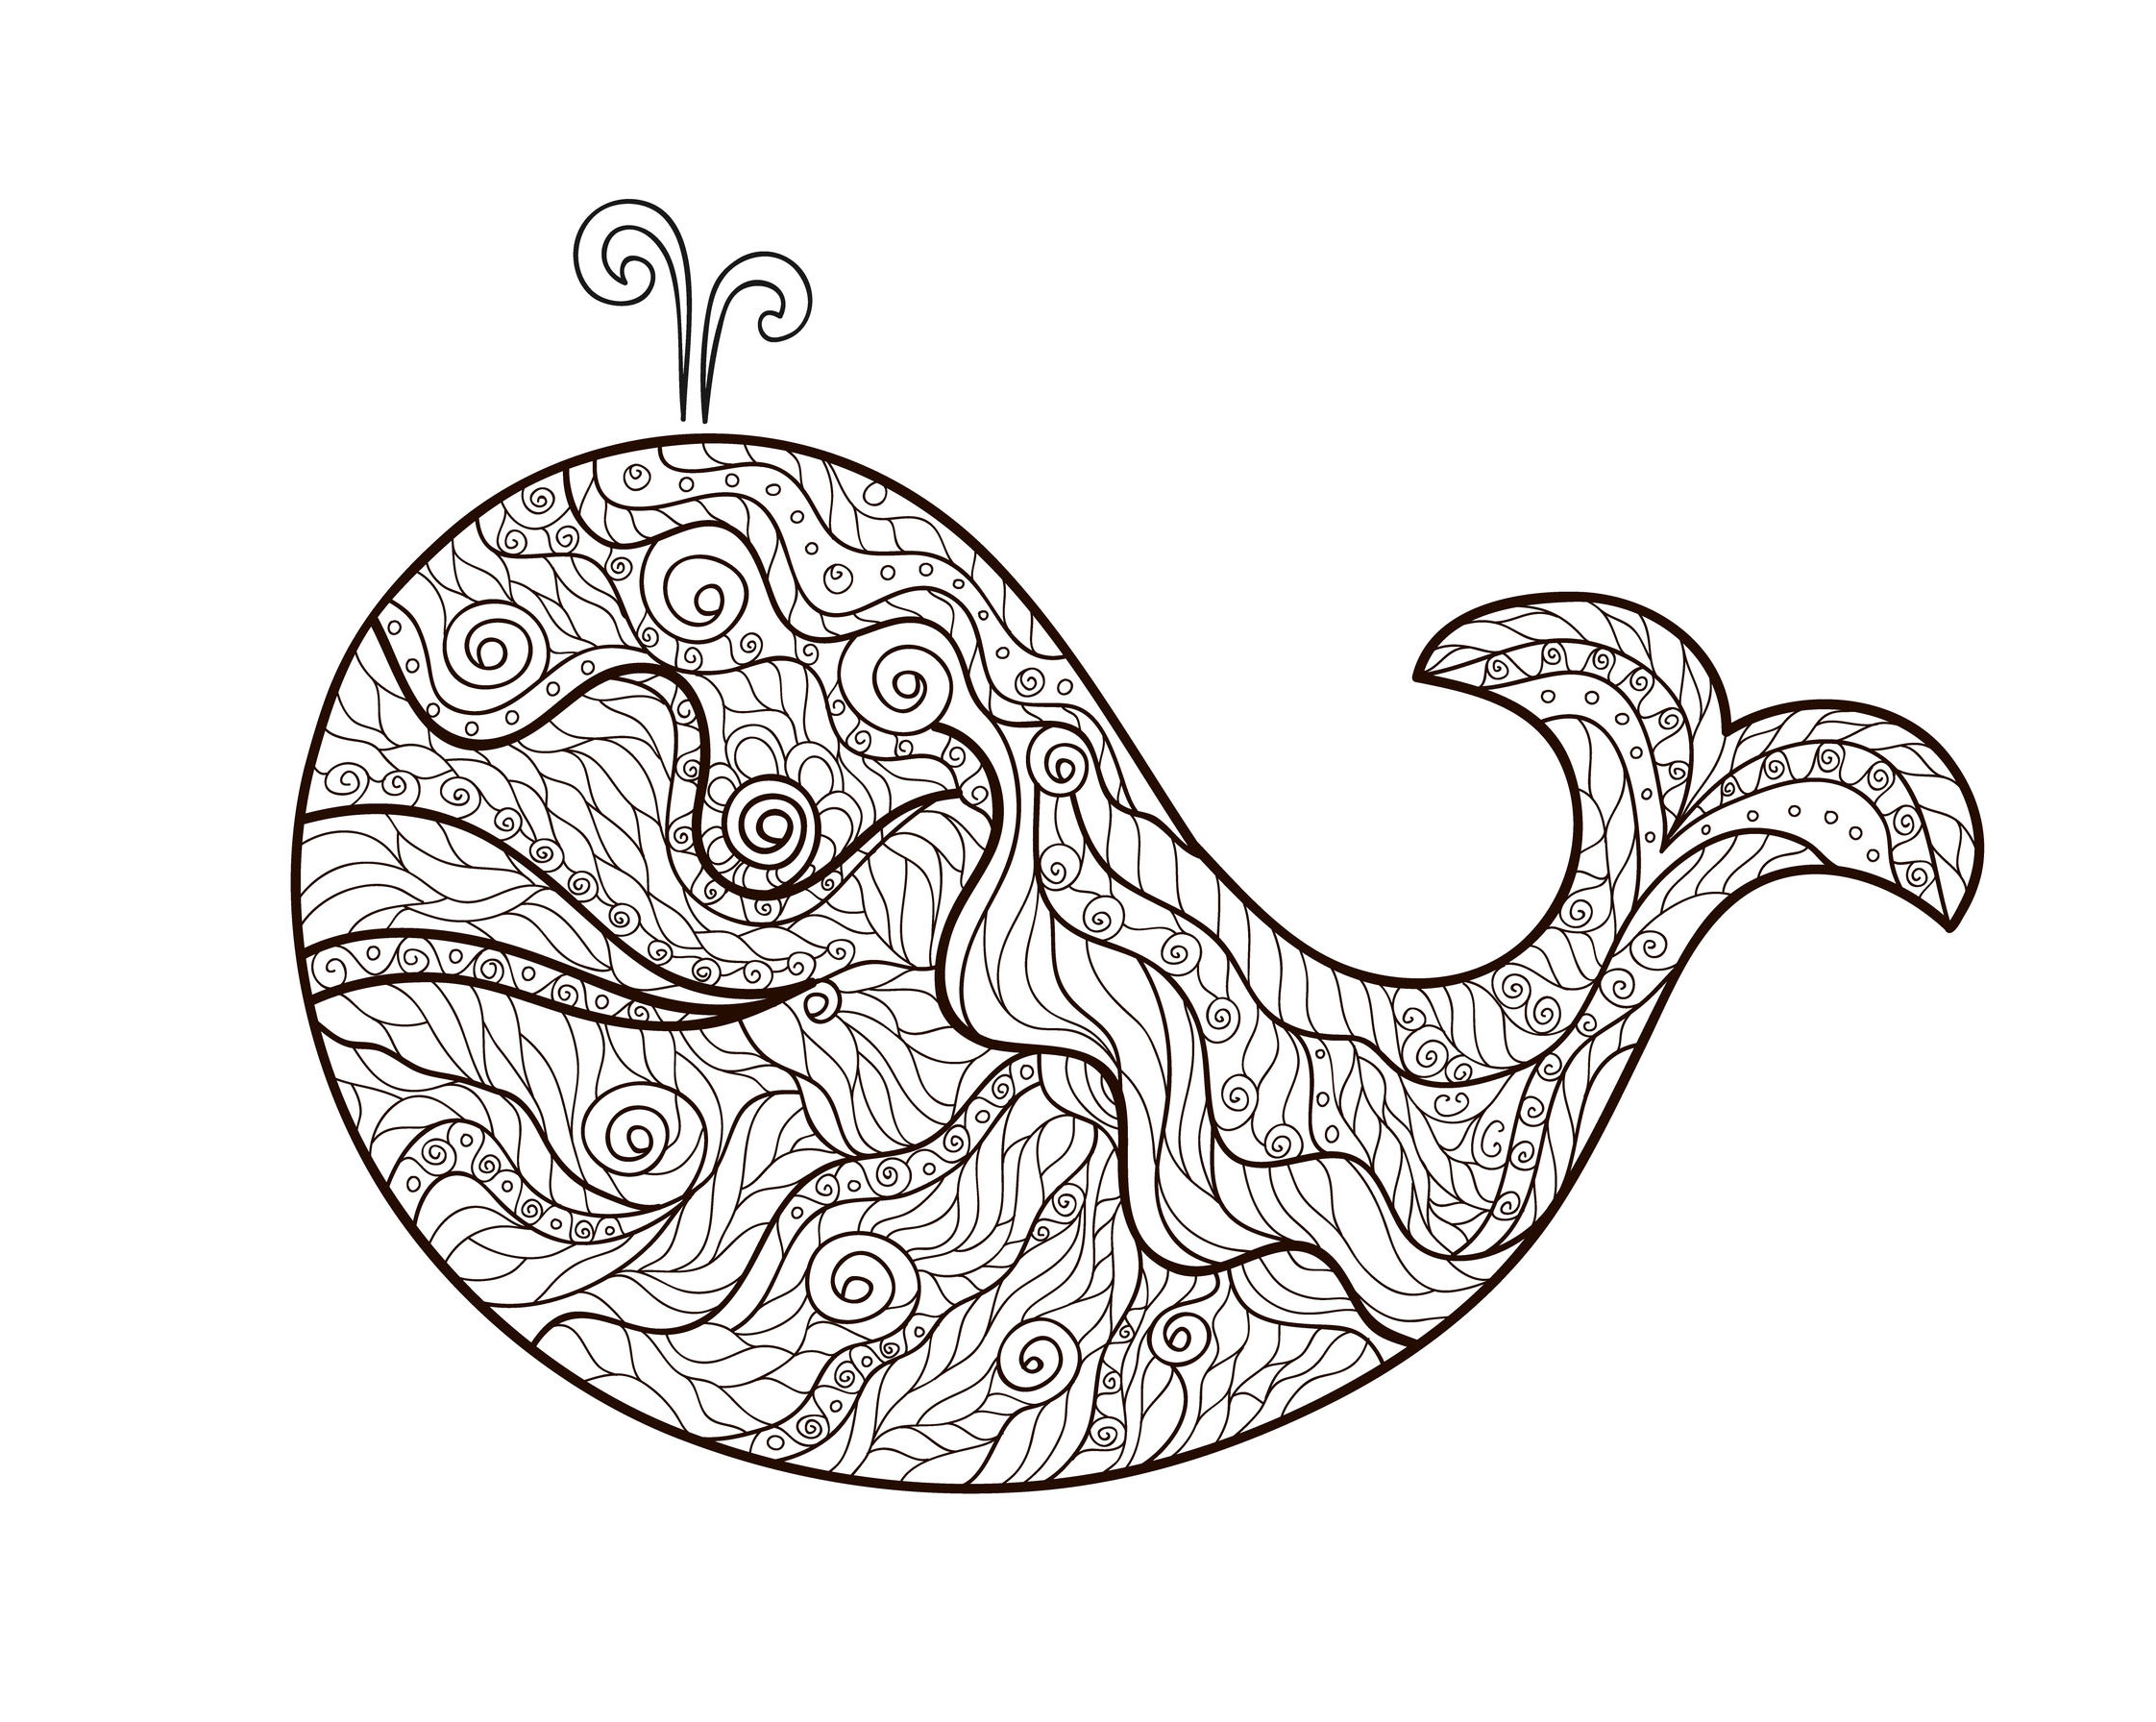 A beautiful whale, drawn with Zentangle style, by Meggichka